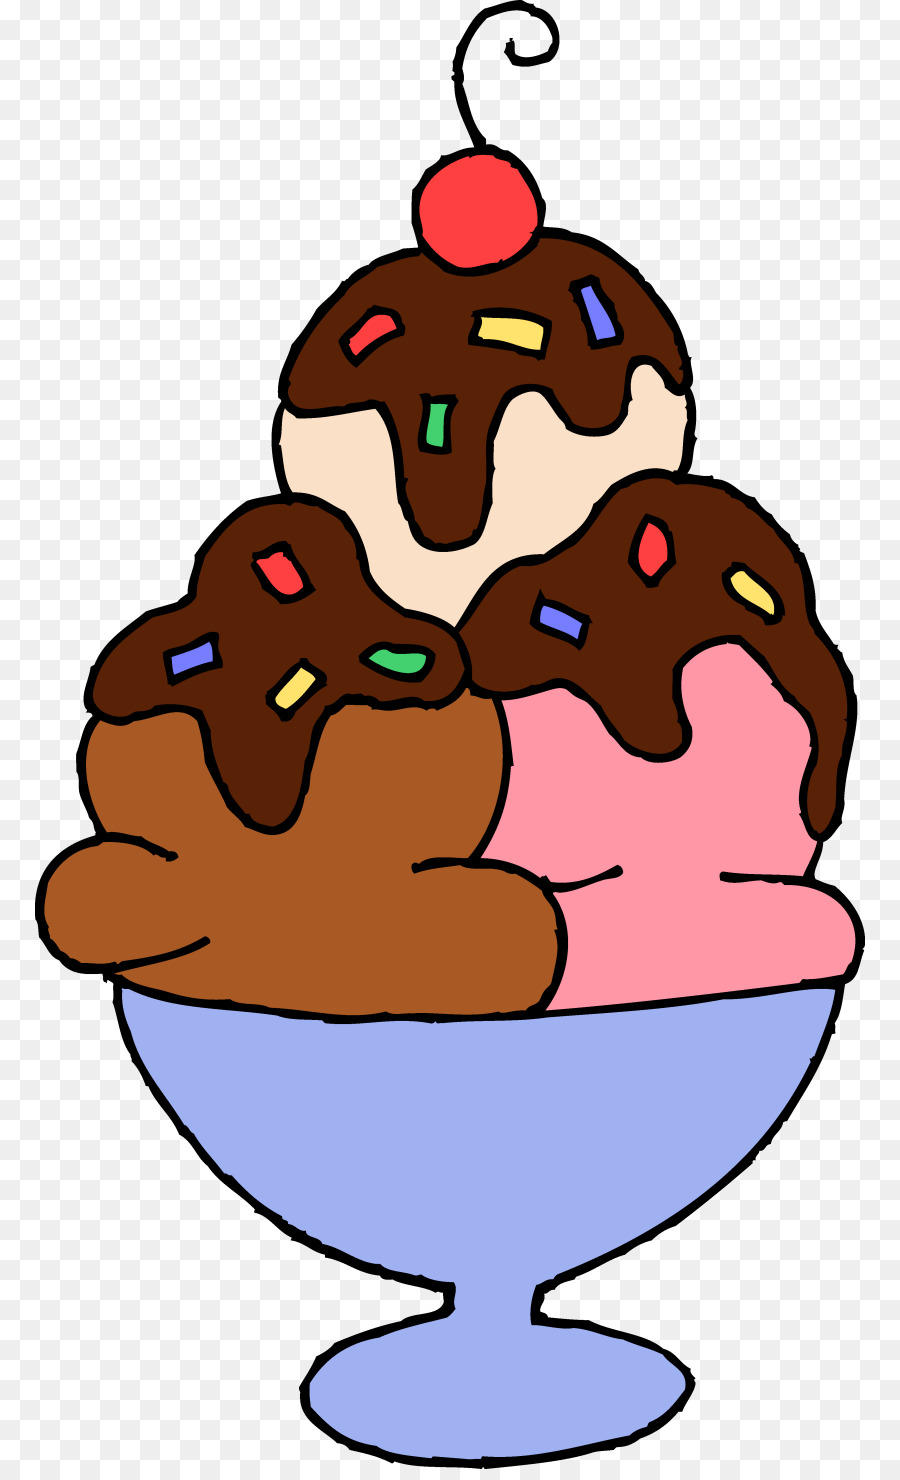 Ice Cream Background png download.